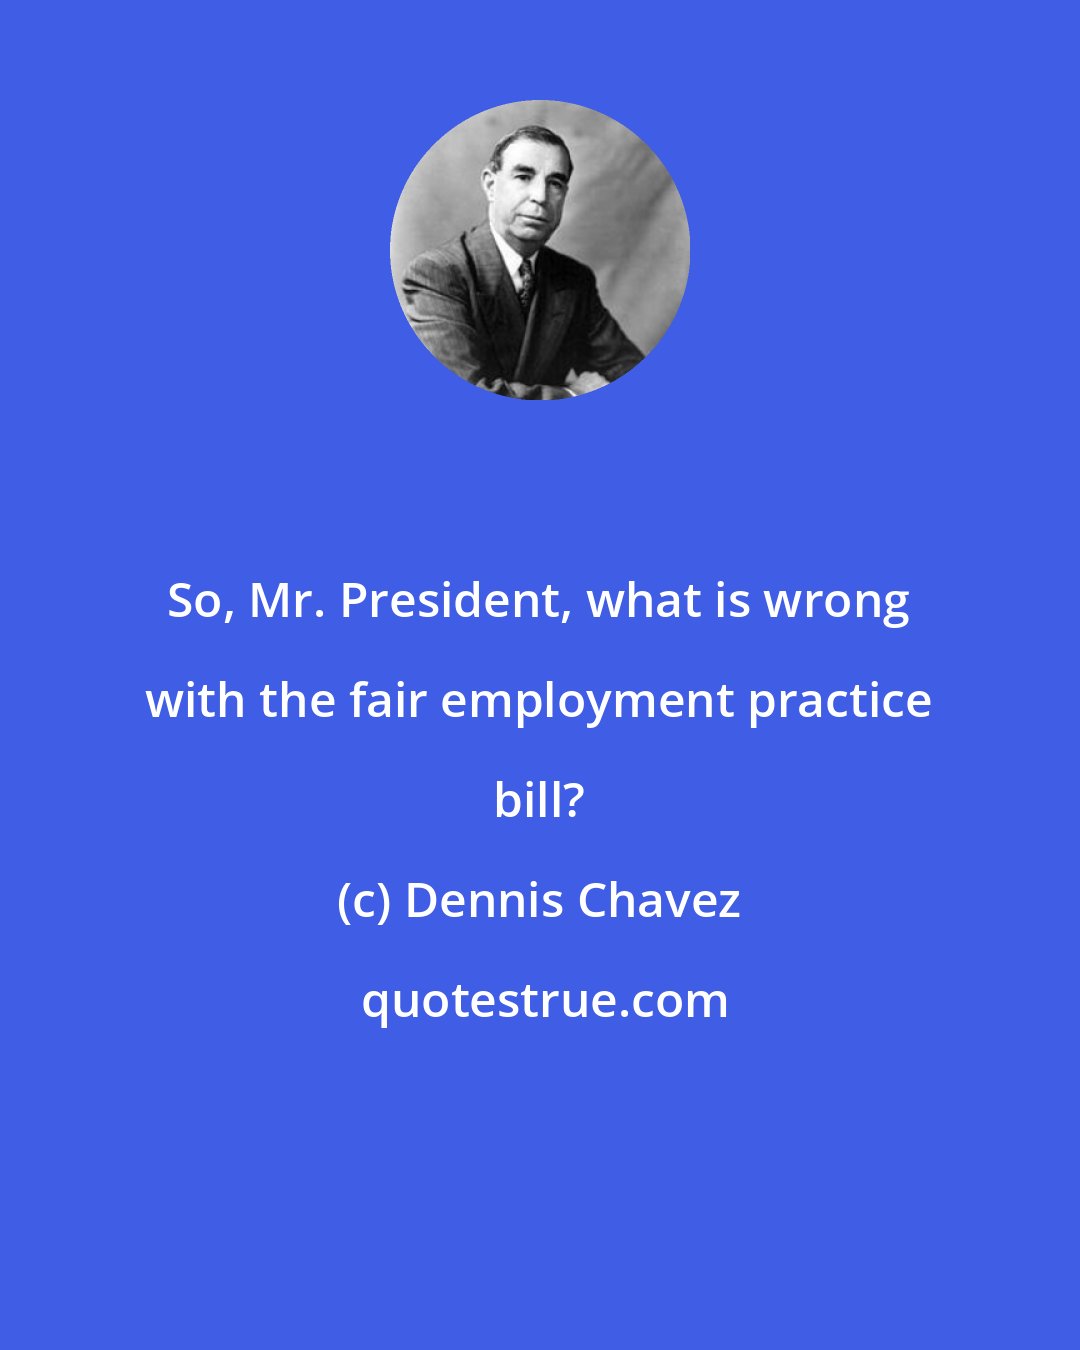 Dennis Chavez: So, Mr. President, what is wrong with the fair employment practice bill?